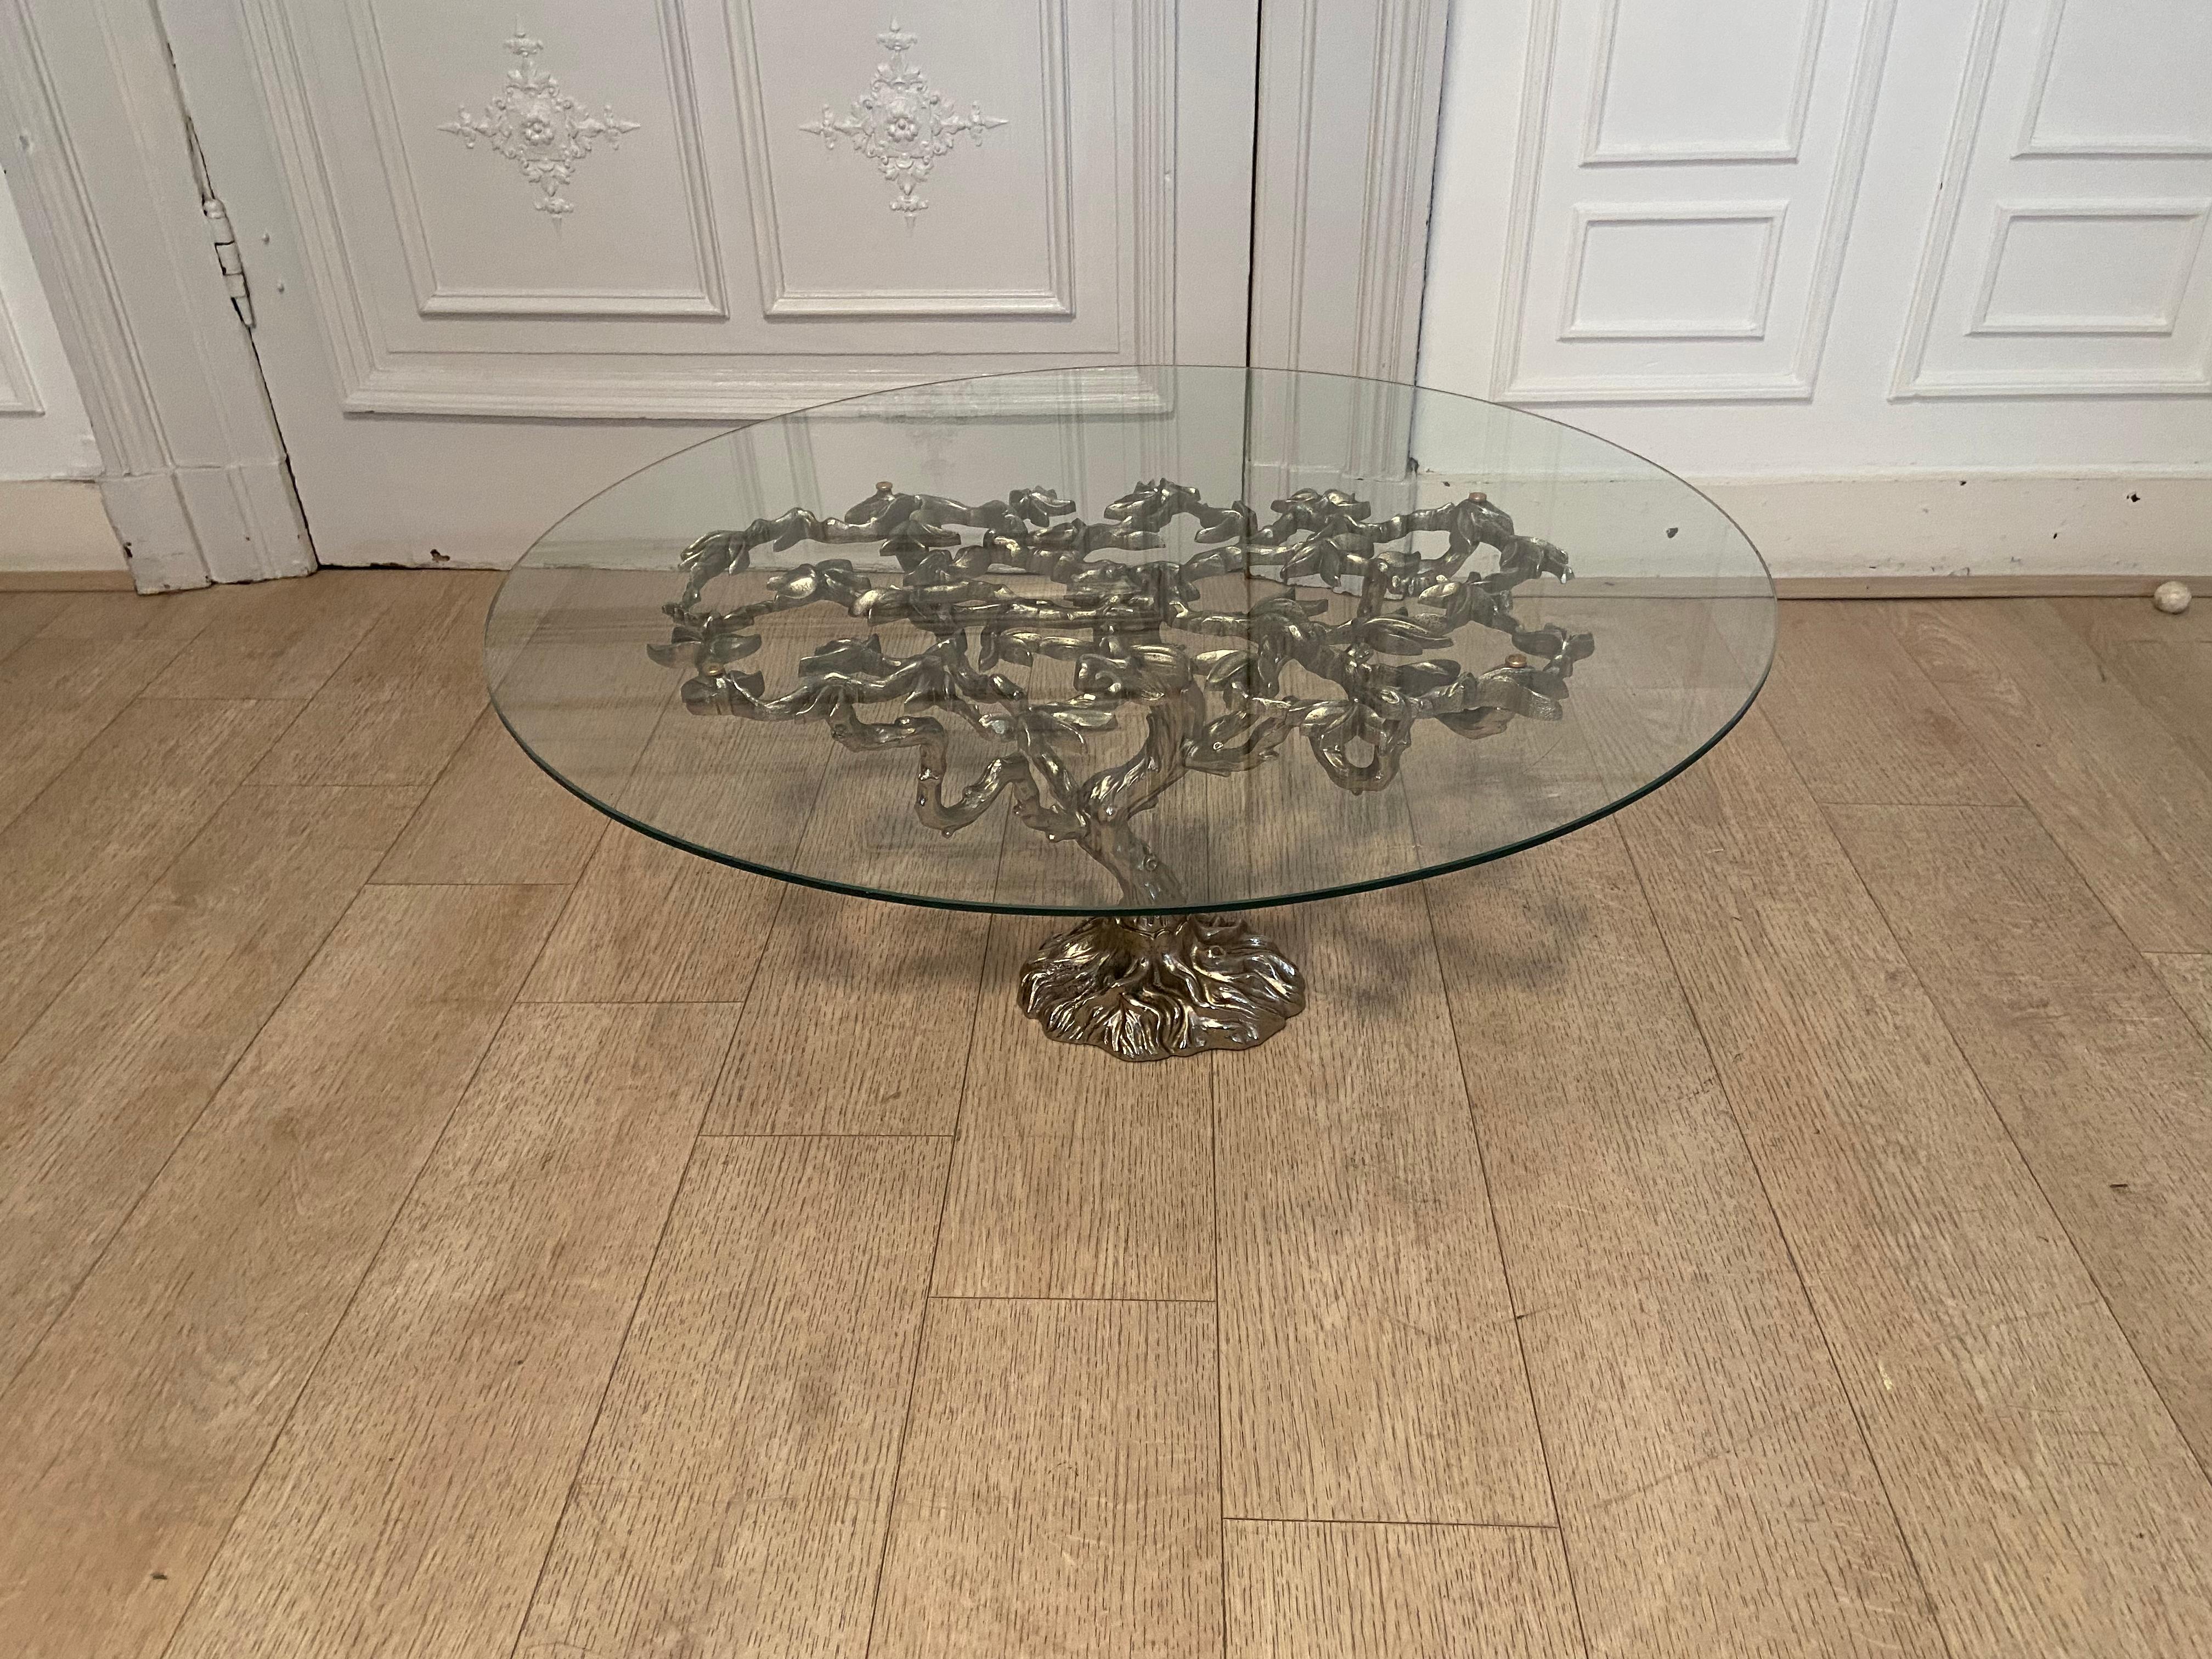 Mid-Century Modern Mid Century Coffee Table in Silver Color from the 1970s Design with Vegetable